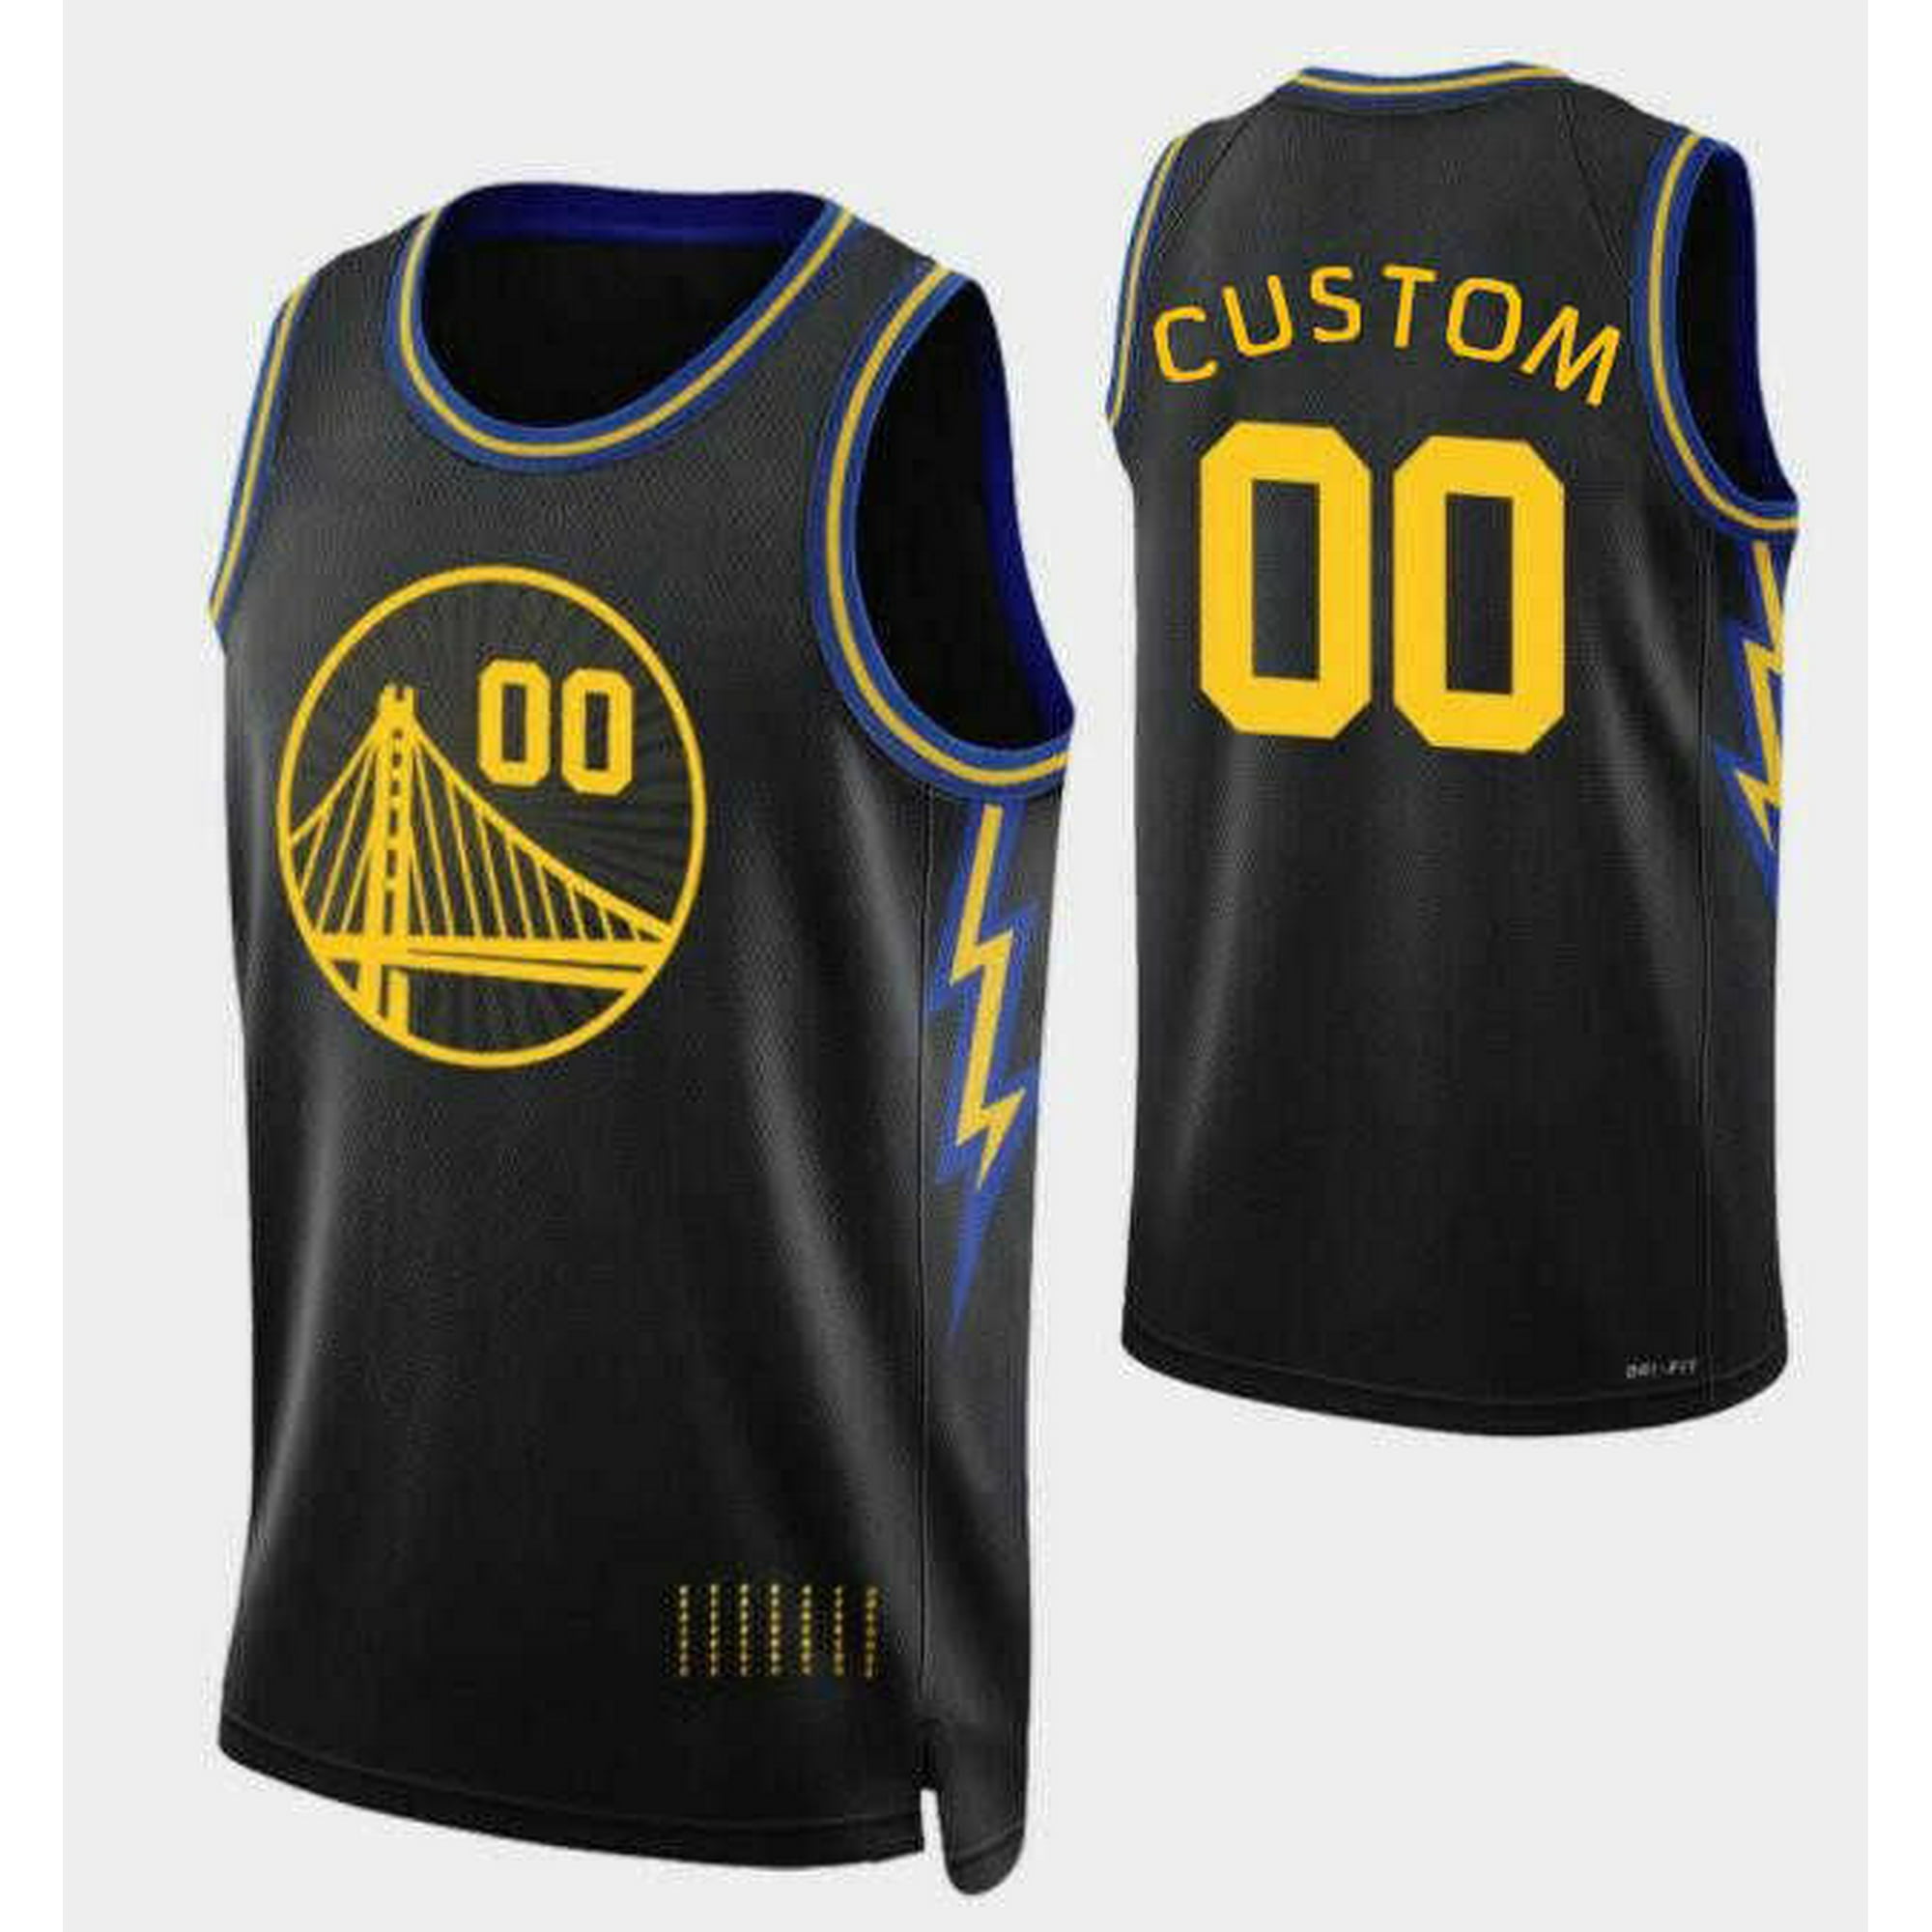 Shop Jersey For Men Basketball Warriors Jordan Poole with great